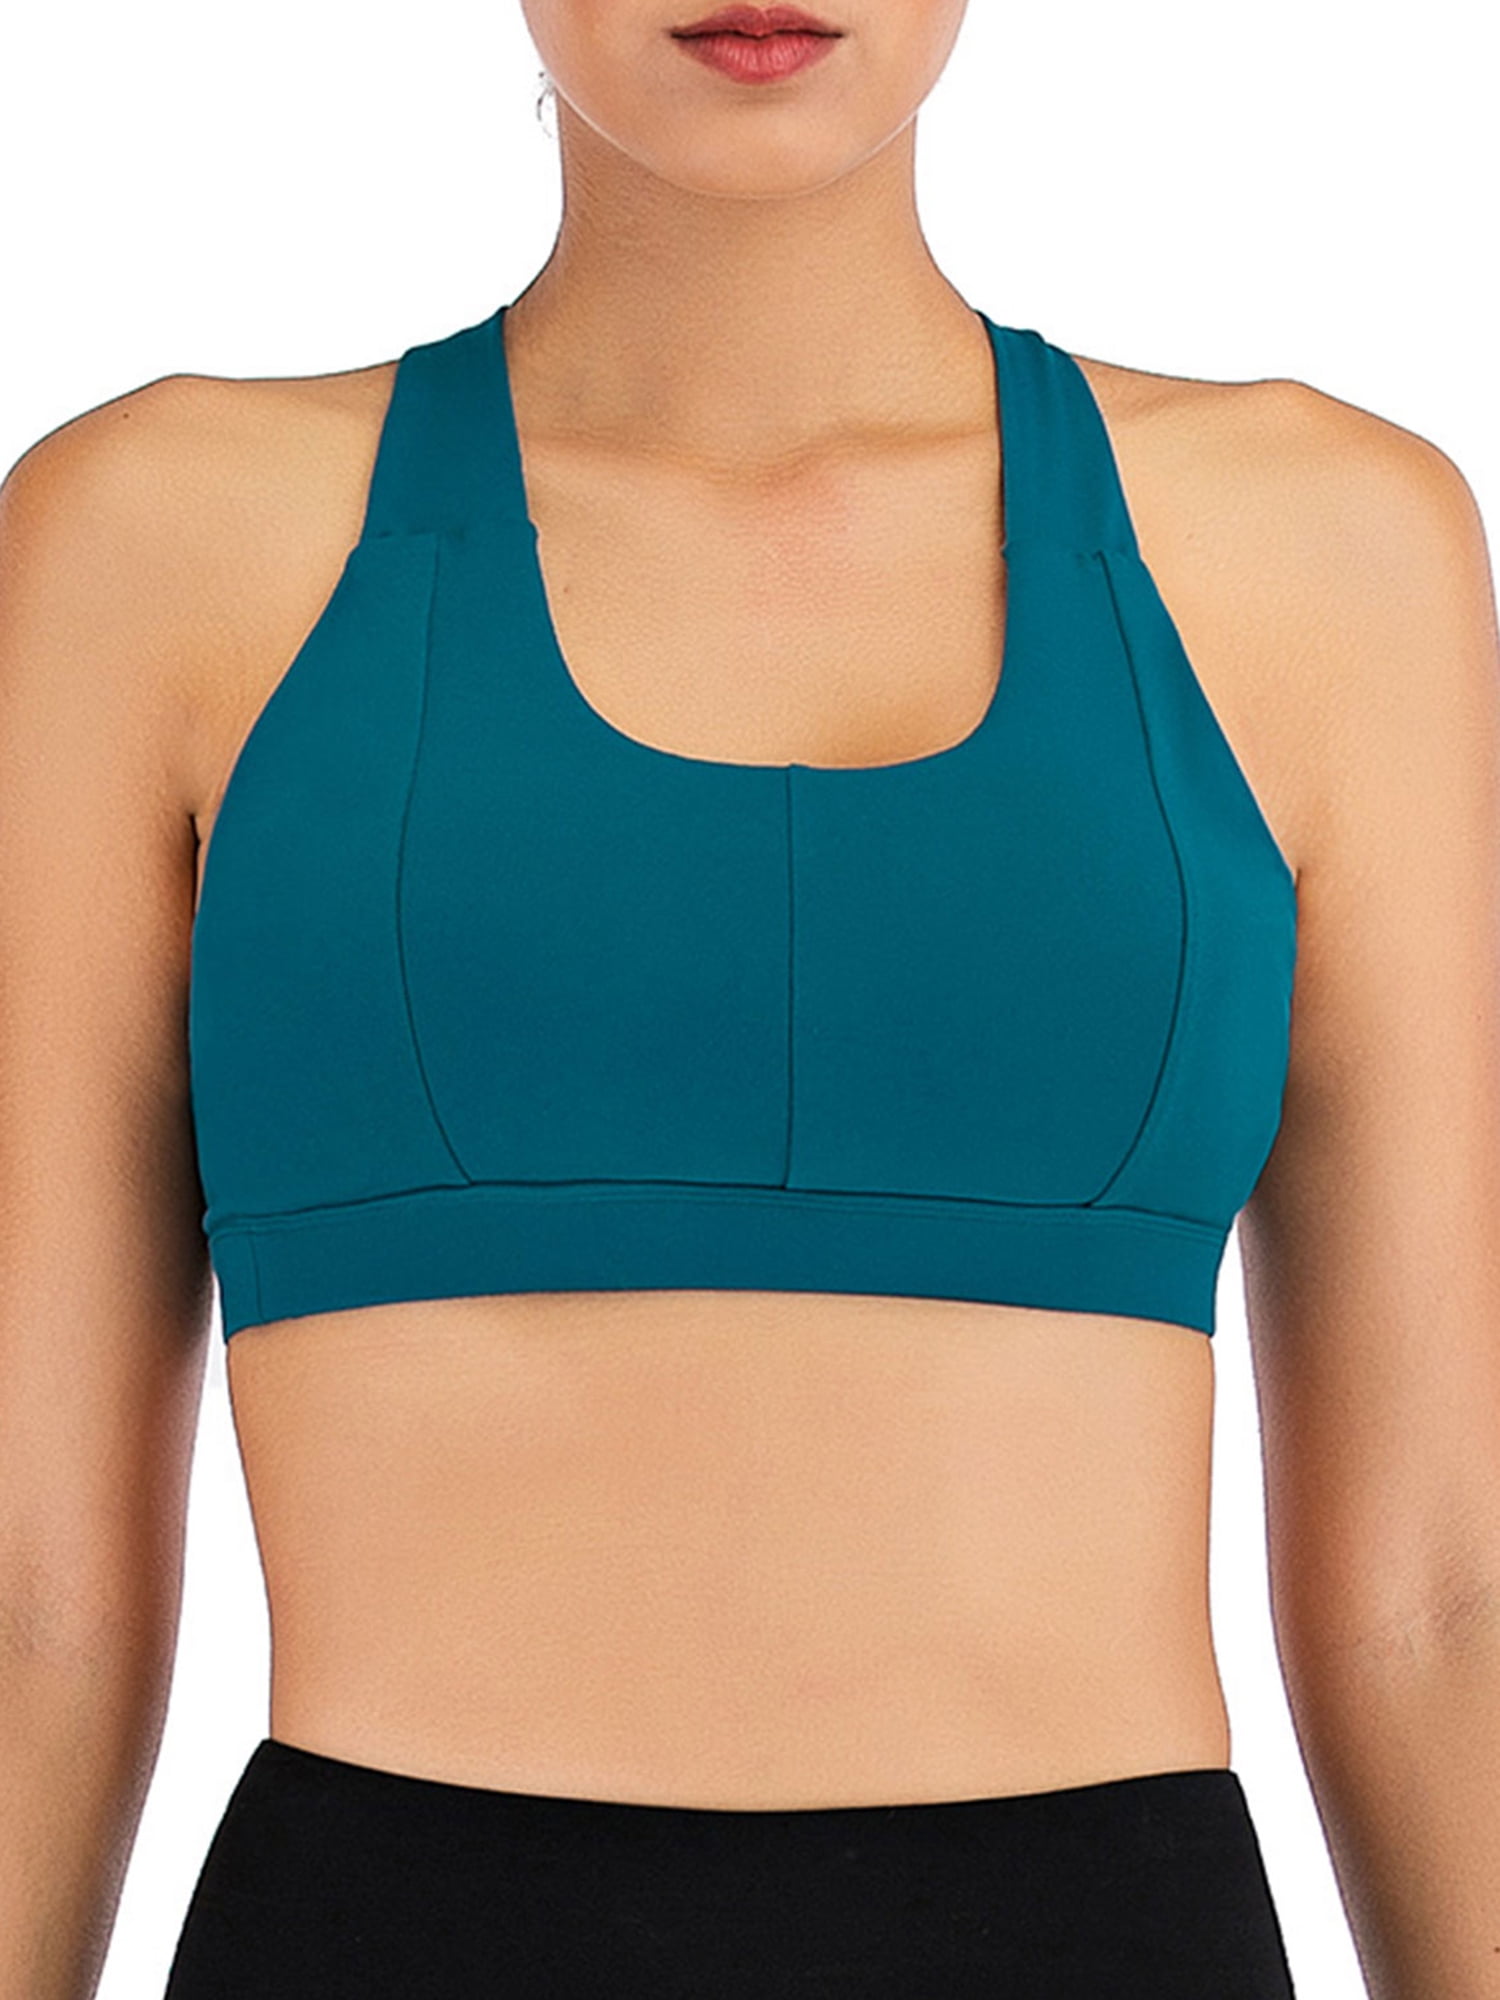 Youloveit Youloveit Women S Sports Bra Seamless Paded Cross Back